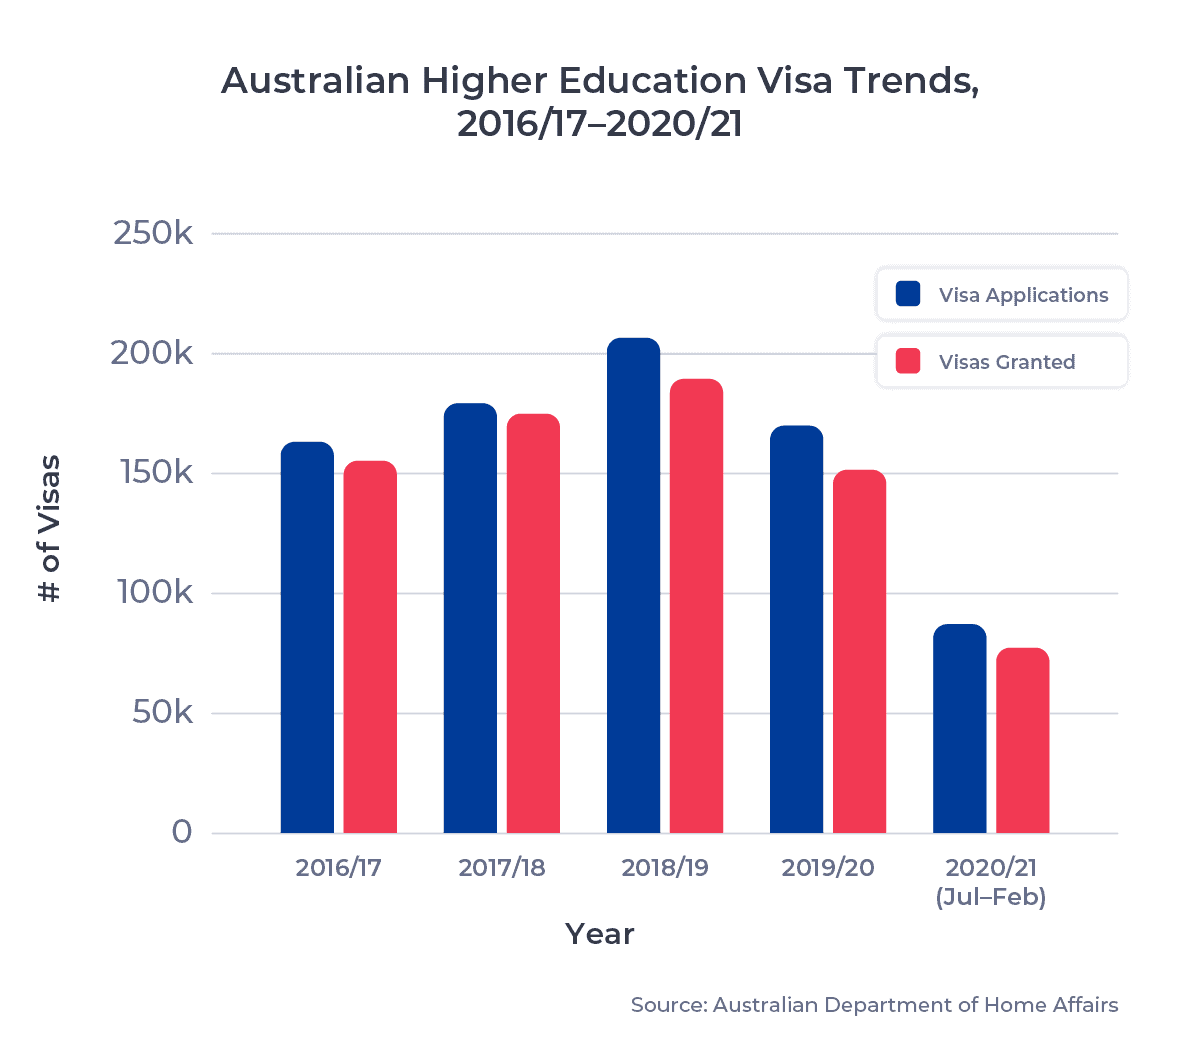 Australia Higher Education Visa Trends vertical bar graph, showing # of visas issued from 2016/17 to 2020/21